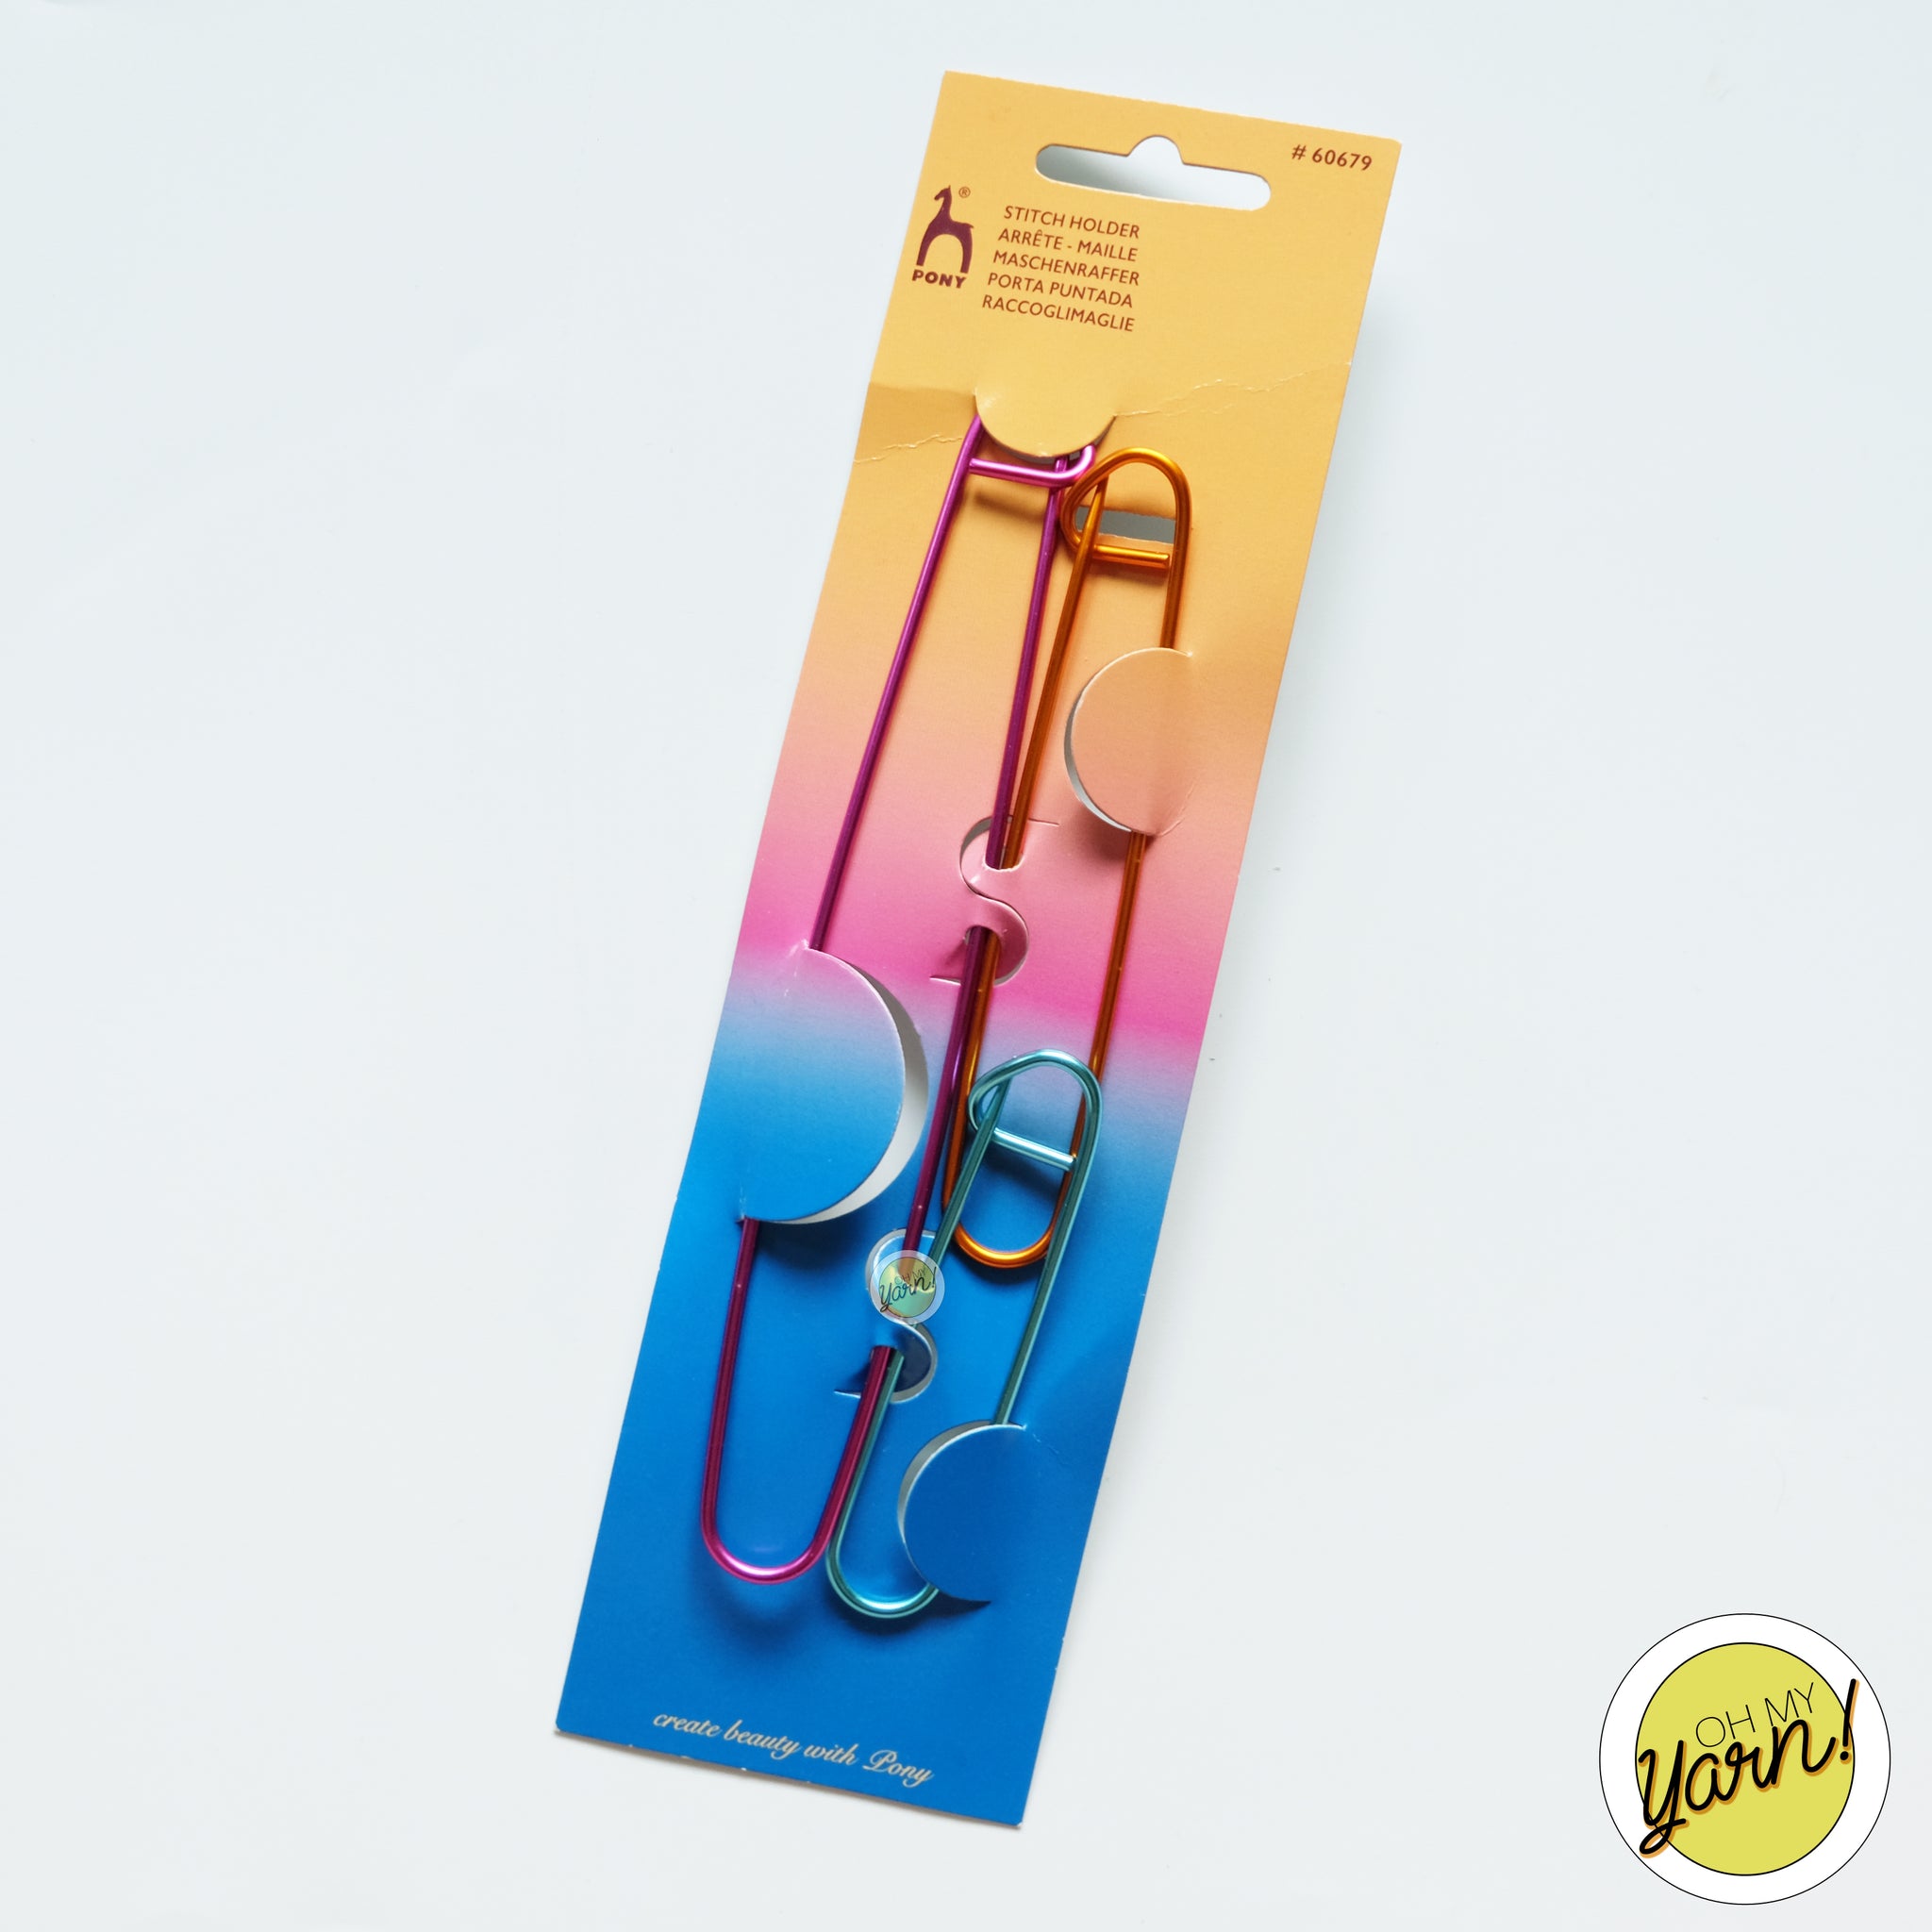 PONY Colored Aluminum Assorted Stitch Holders